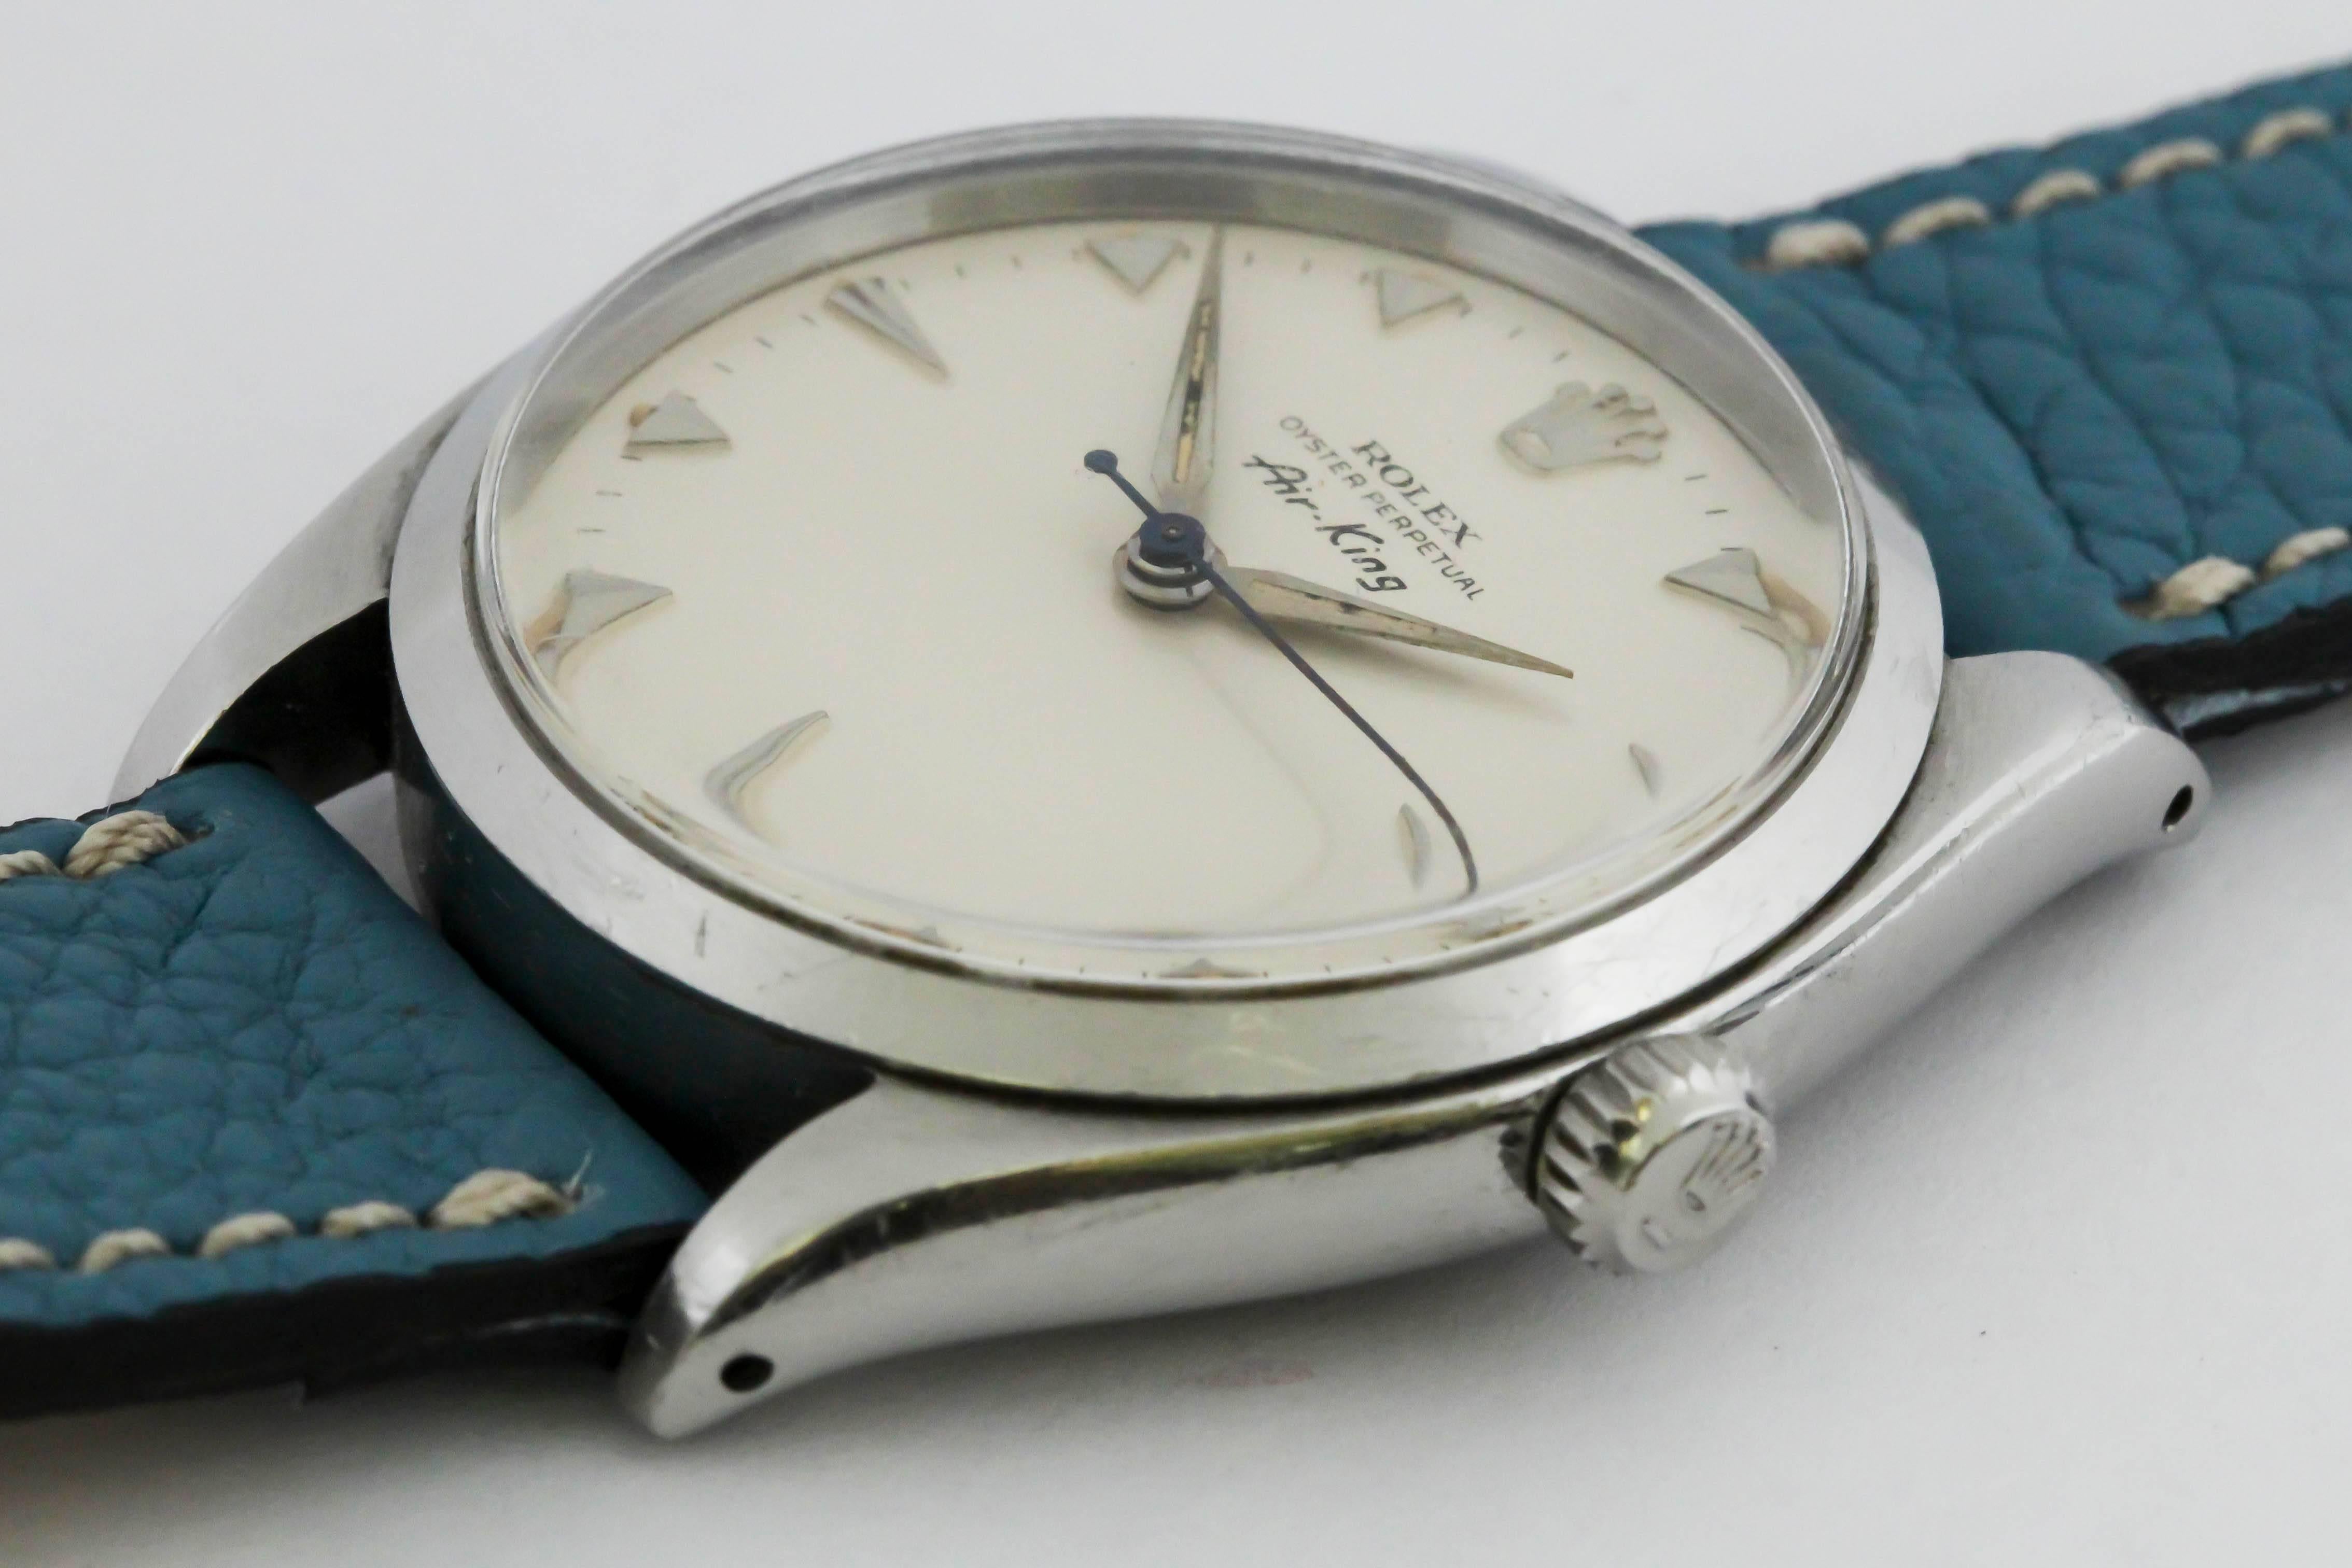 Rolex Stainless Steel Air King automatic Wristwatch Ref 5500, circa 1958 4